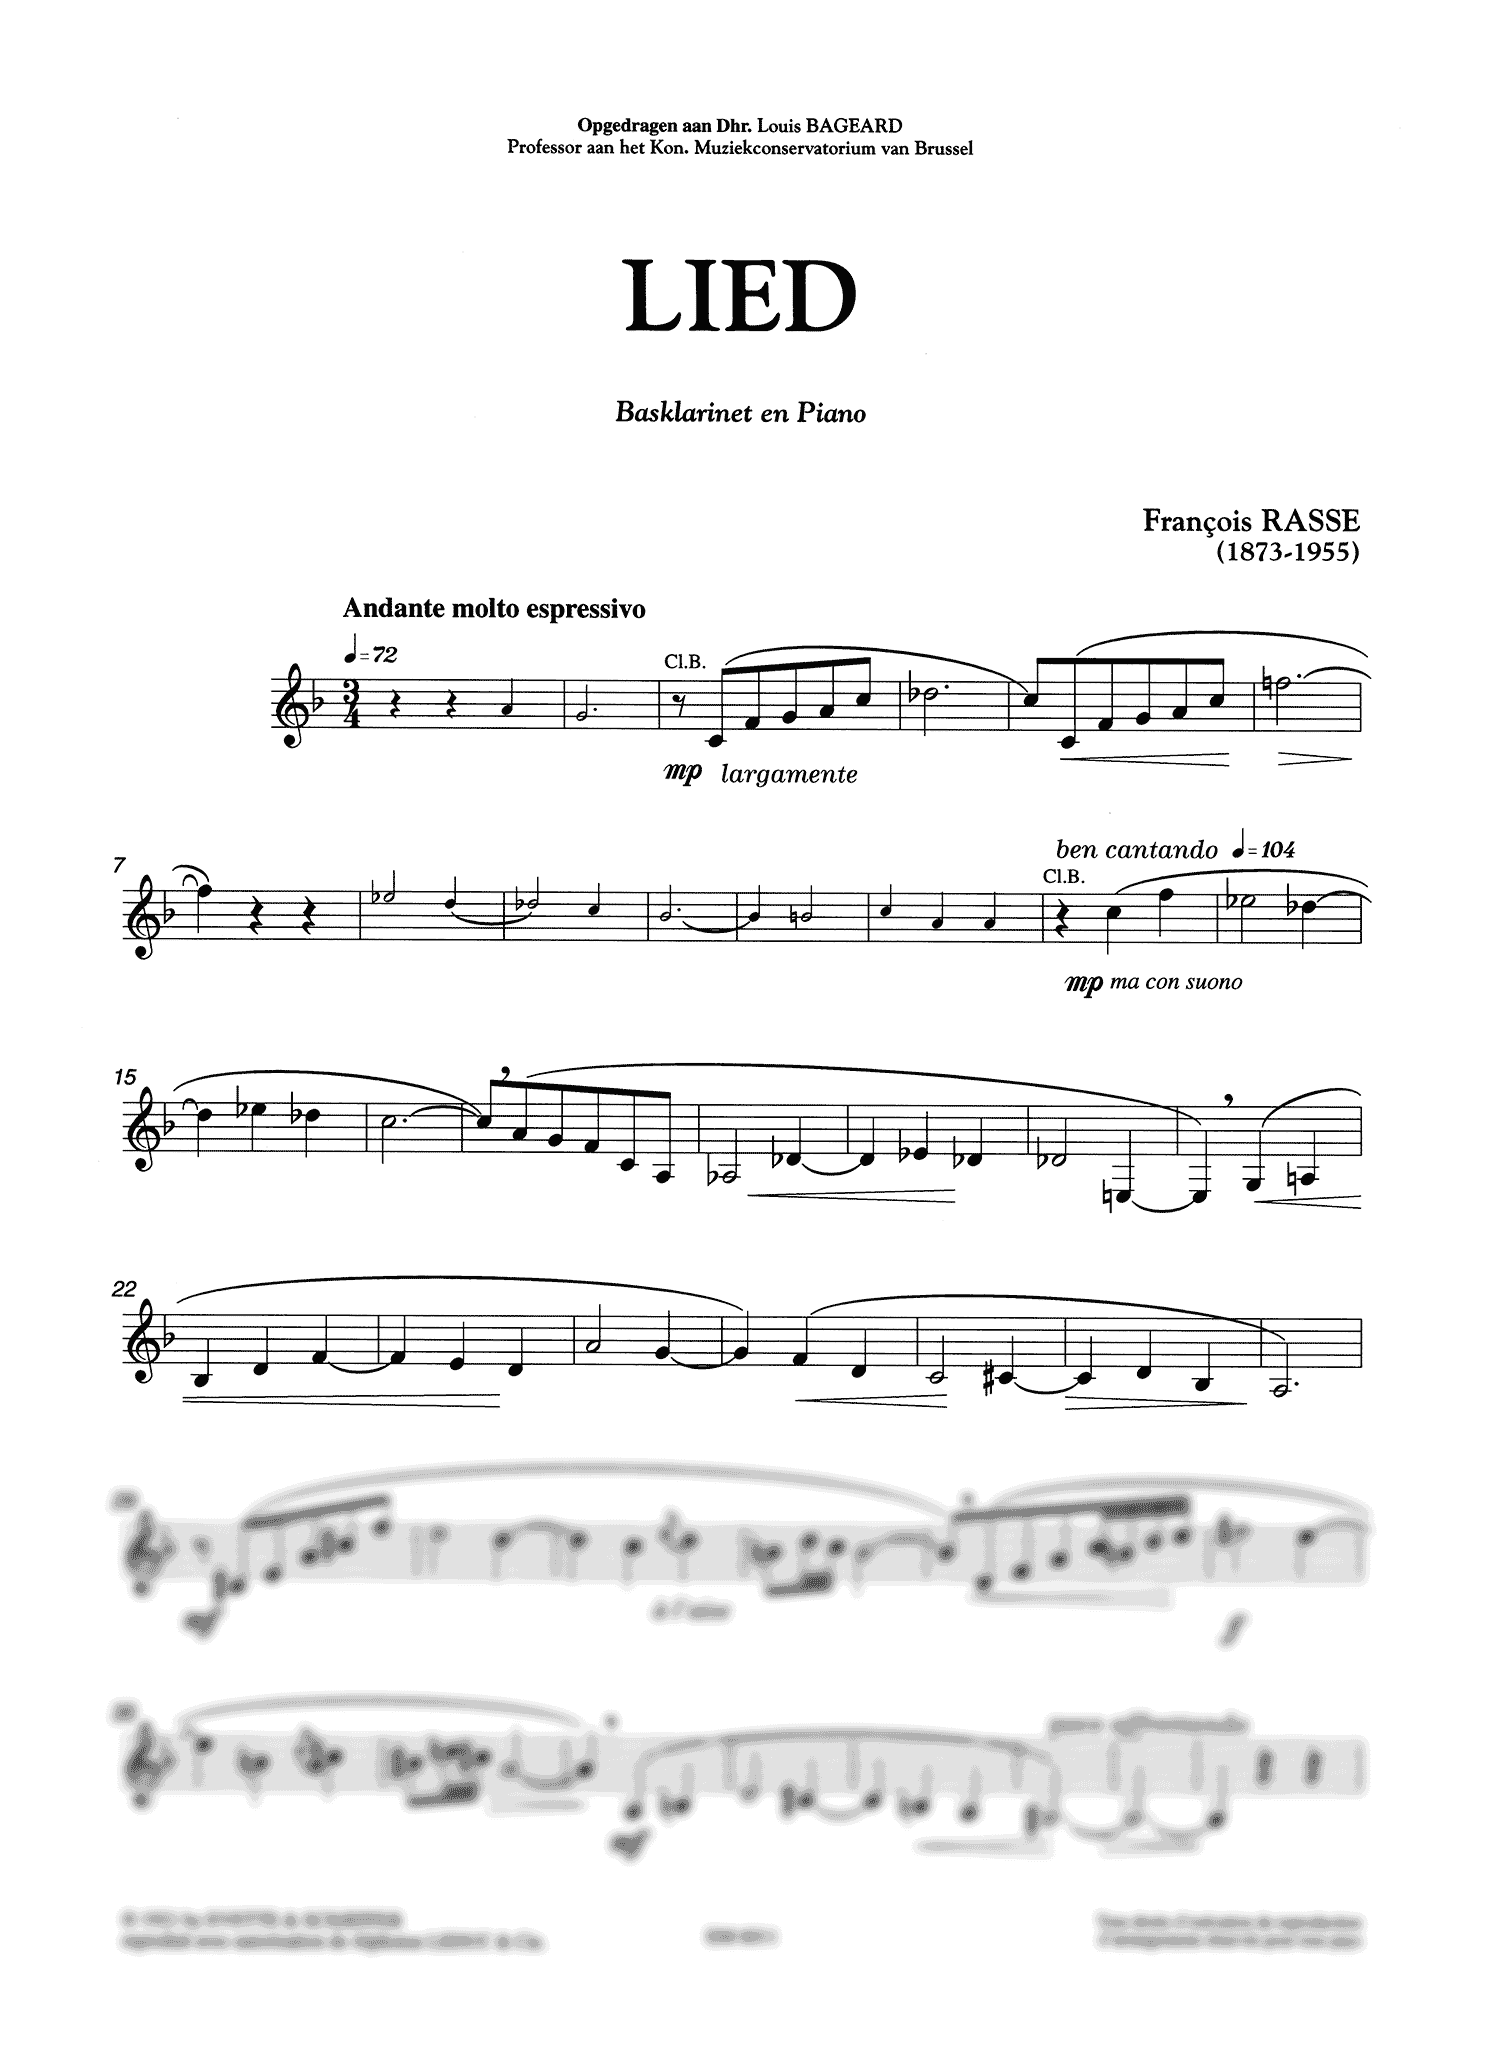 Rasse Lied bass clarinet and piano solo part treble cleff